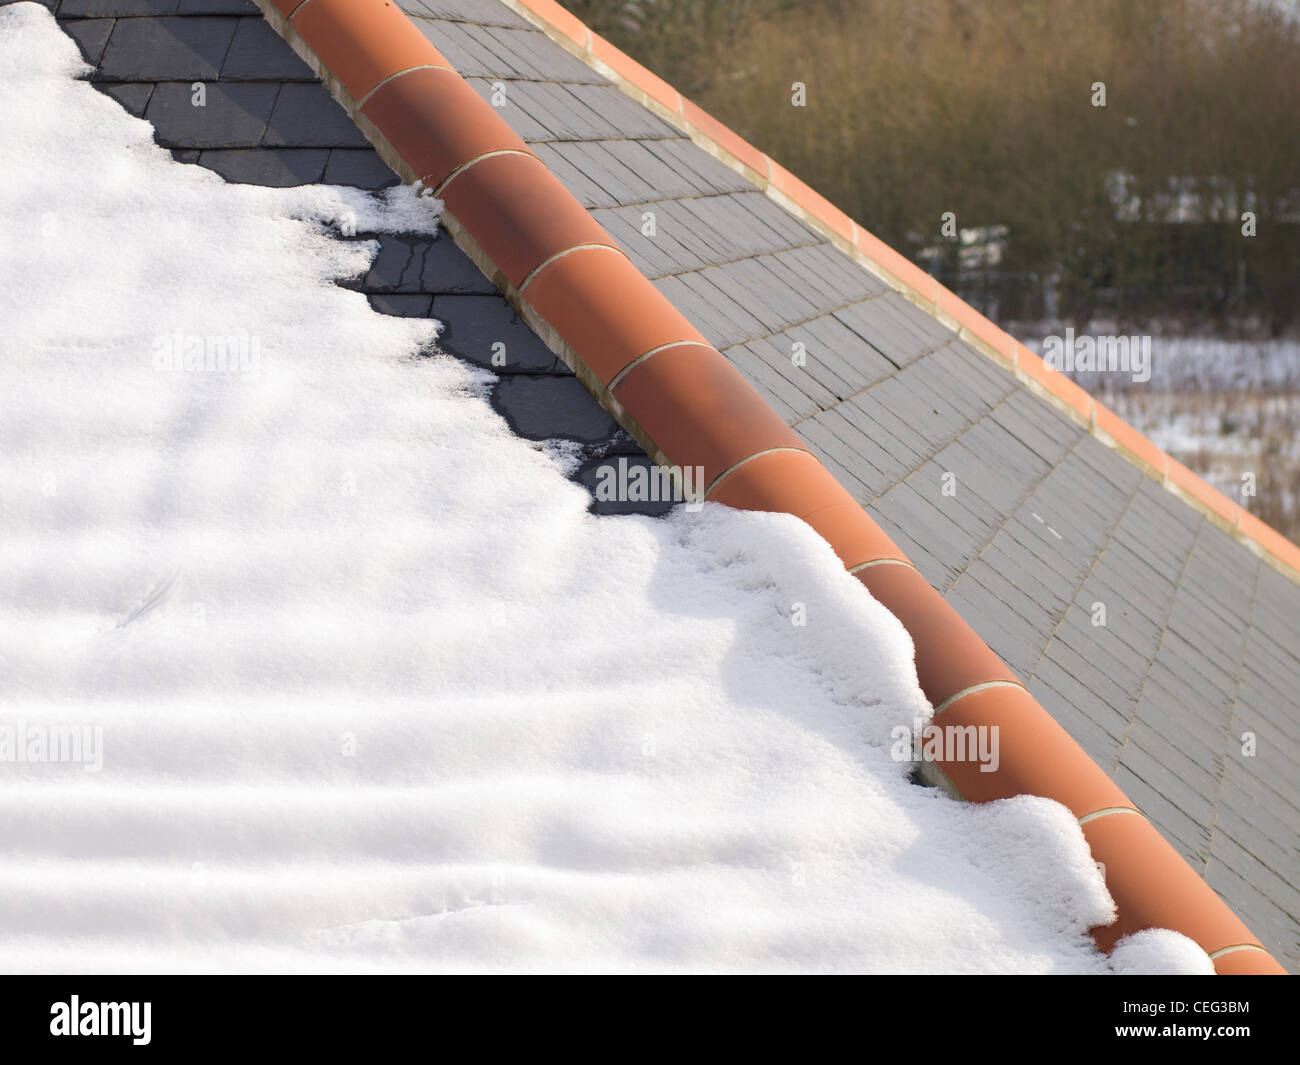 A close-up photo of melting or thawing snow on a tiled roof. Stock Photo